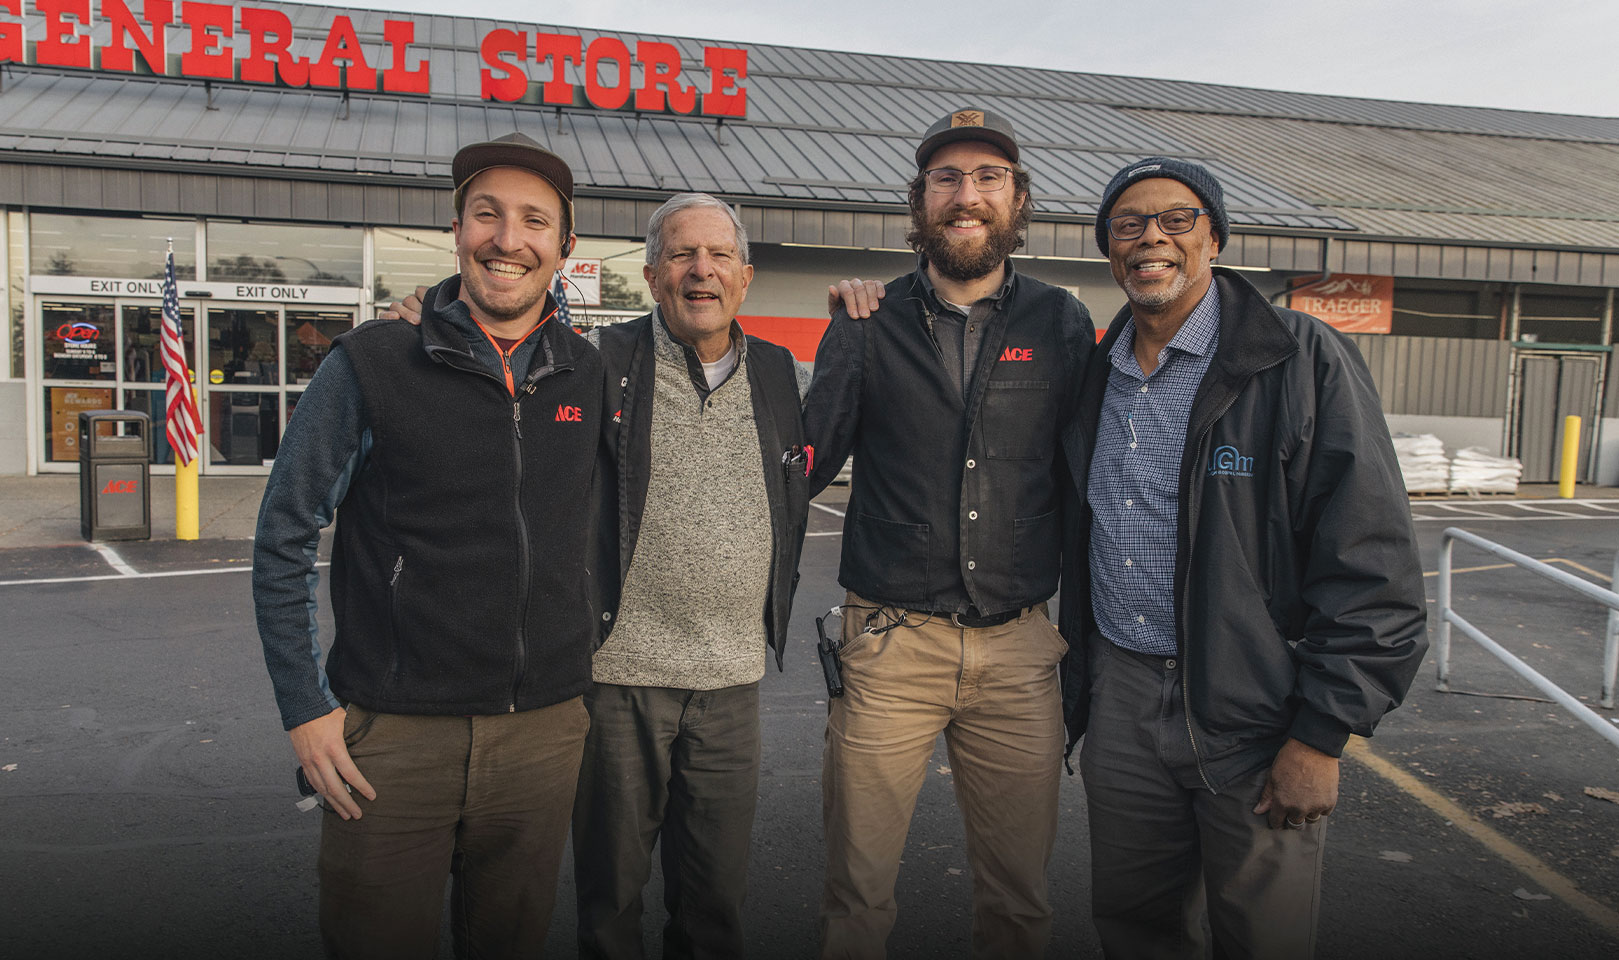 General Store owner Bruce Barany and his sons, Tom and Miles with UGM's Danny Beard